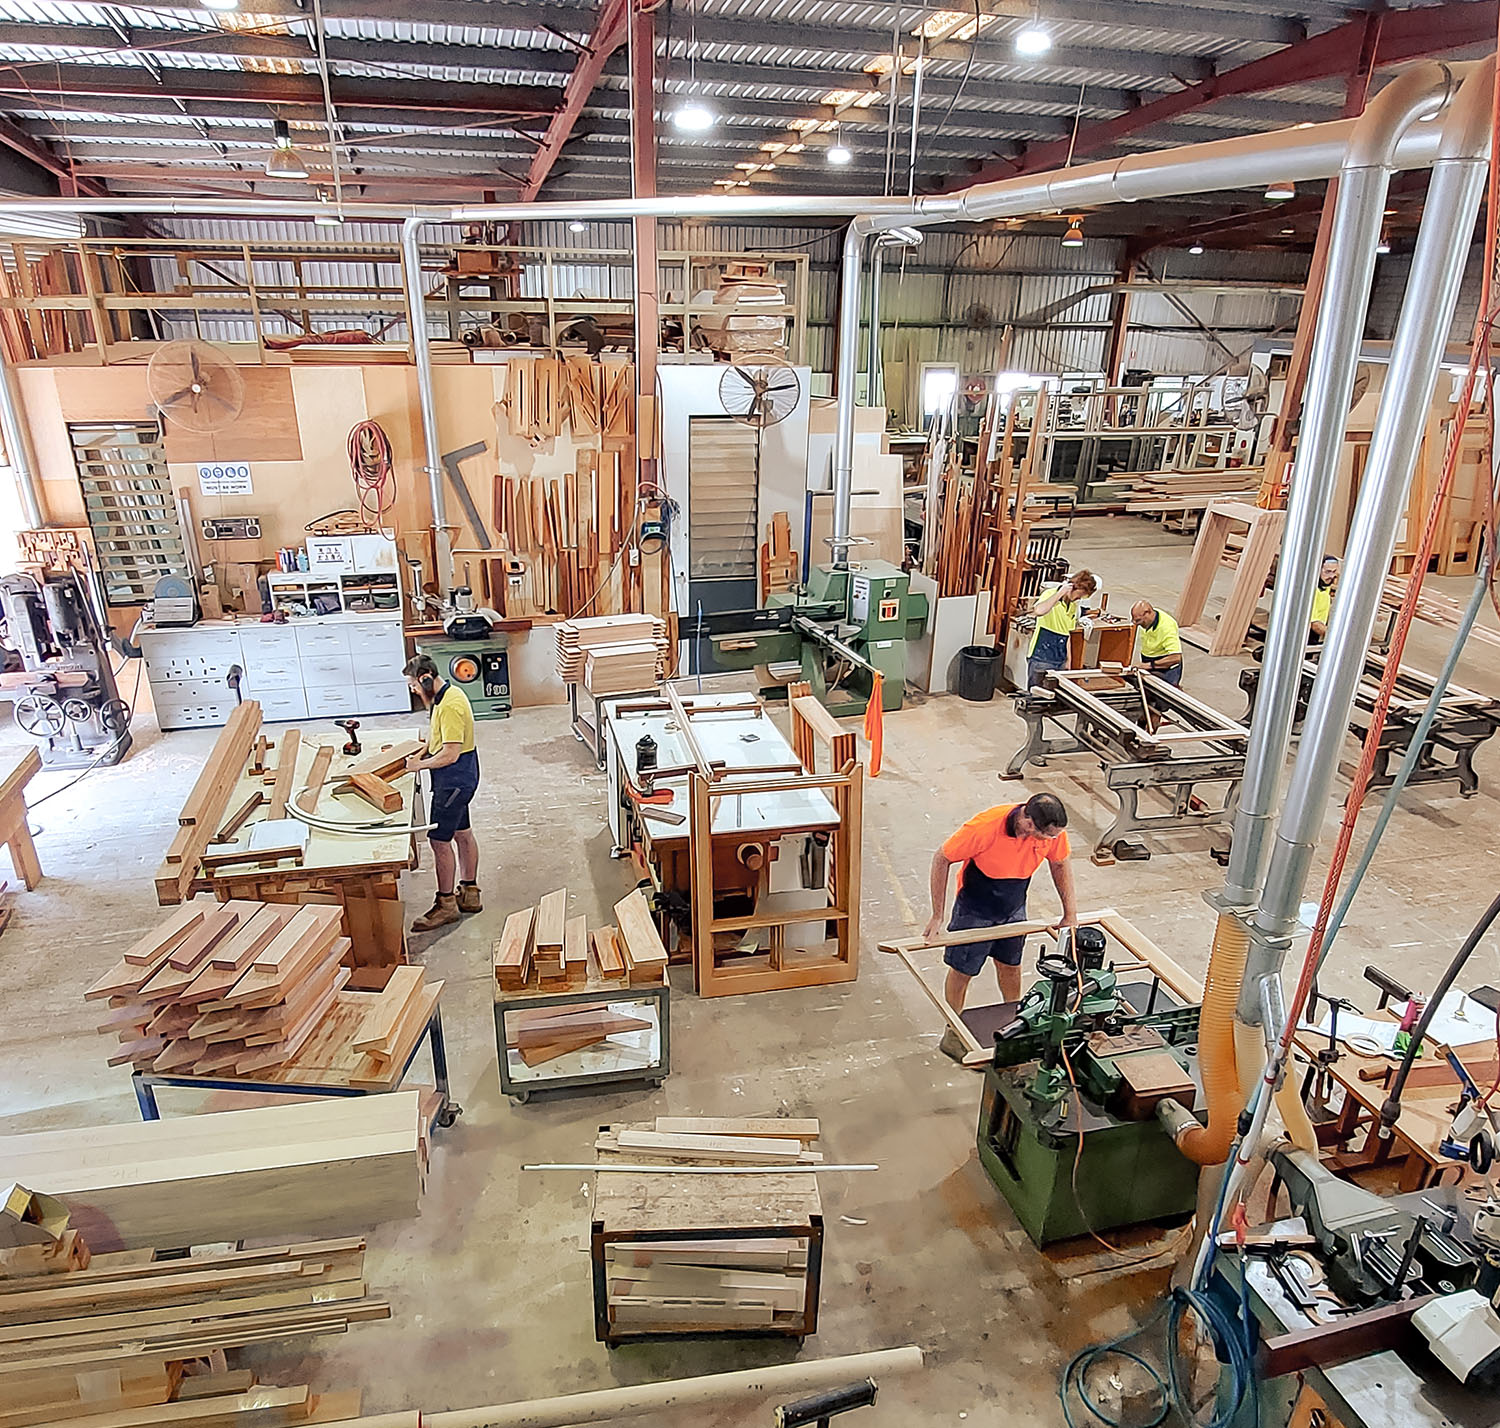 inside the allkind joinery warehouse